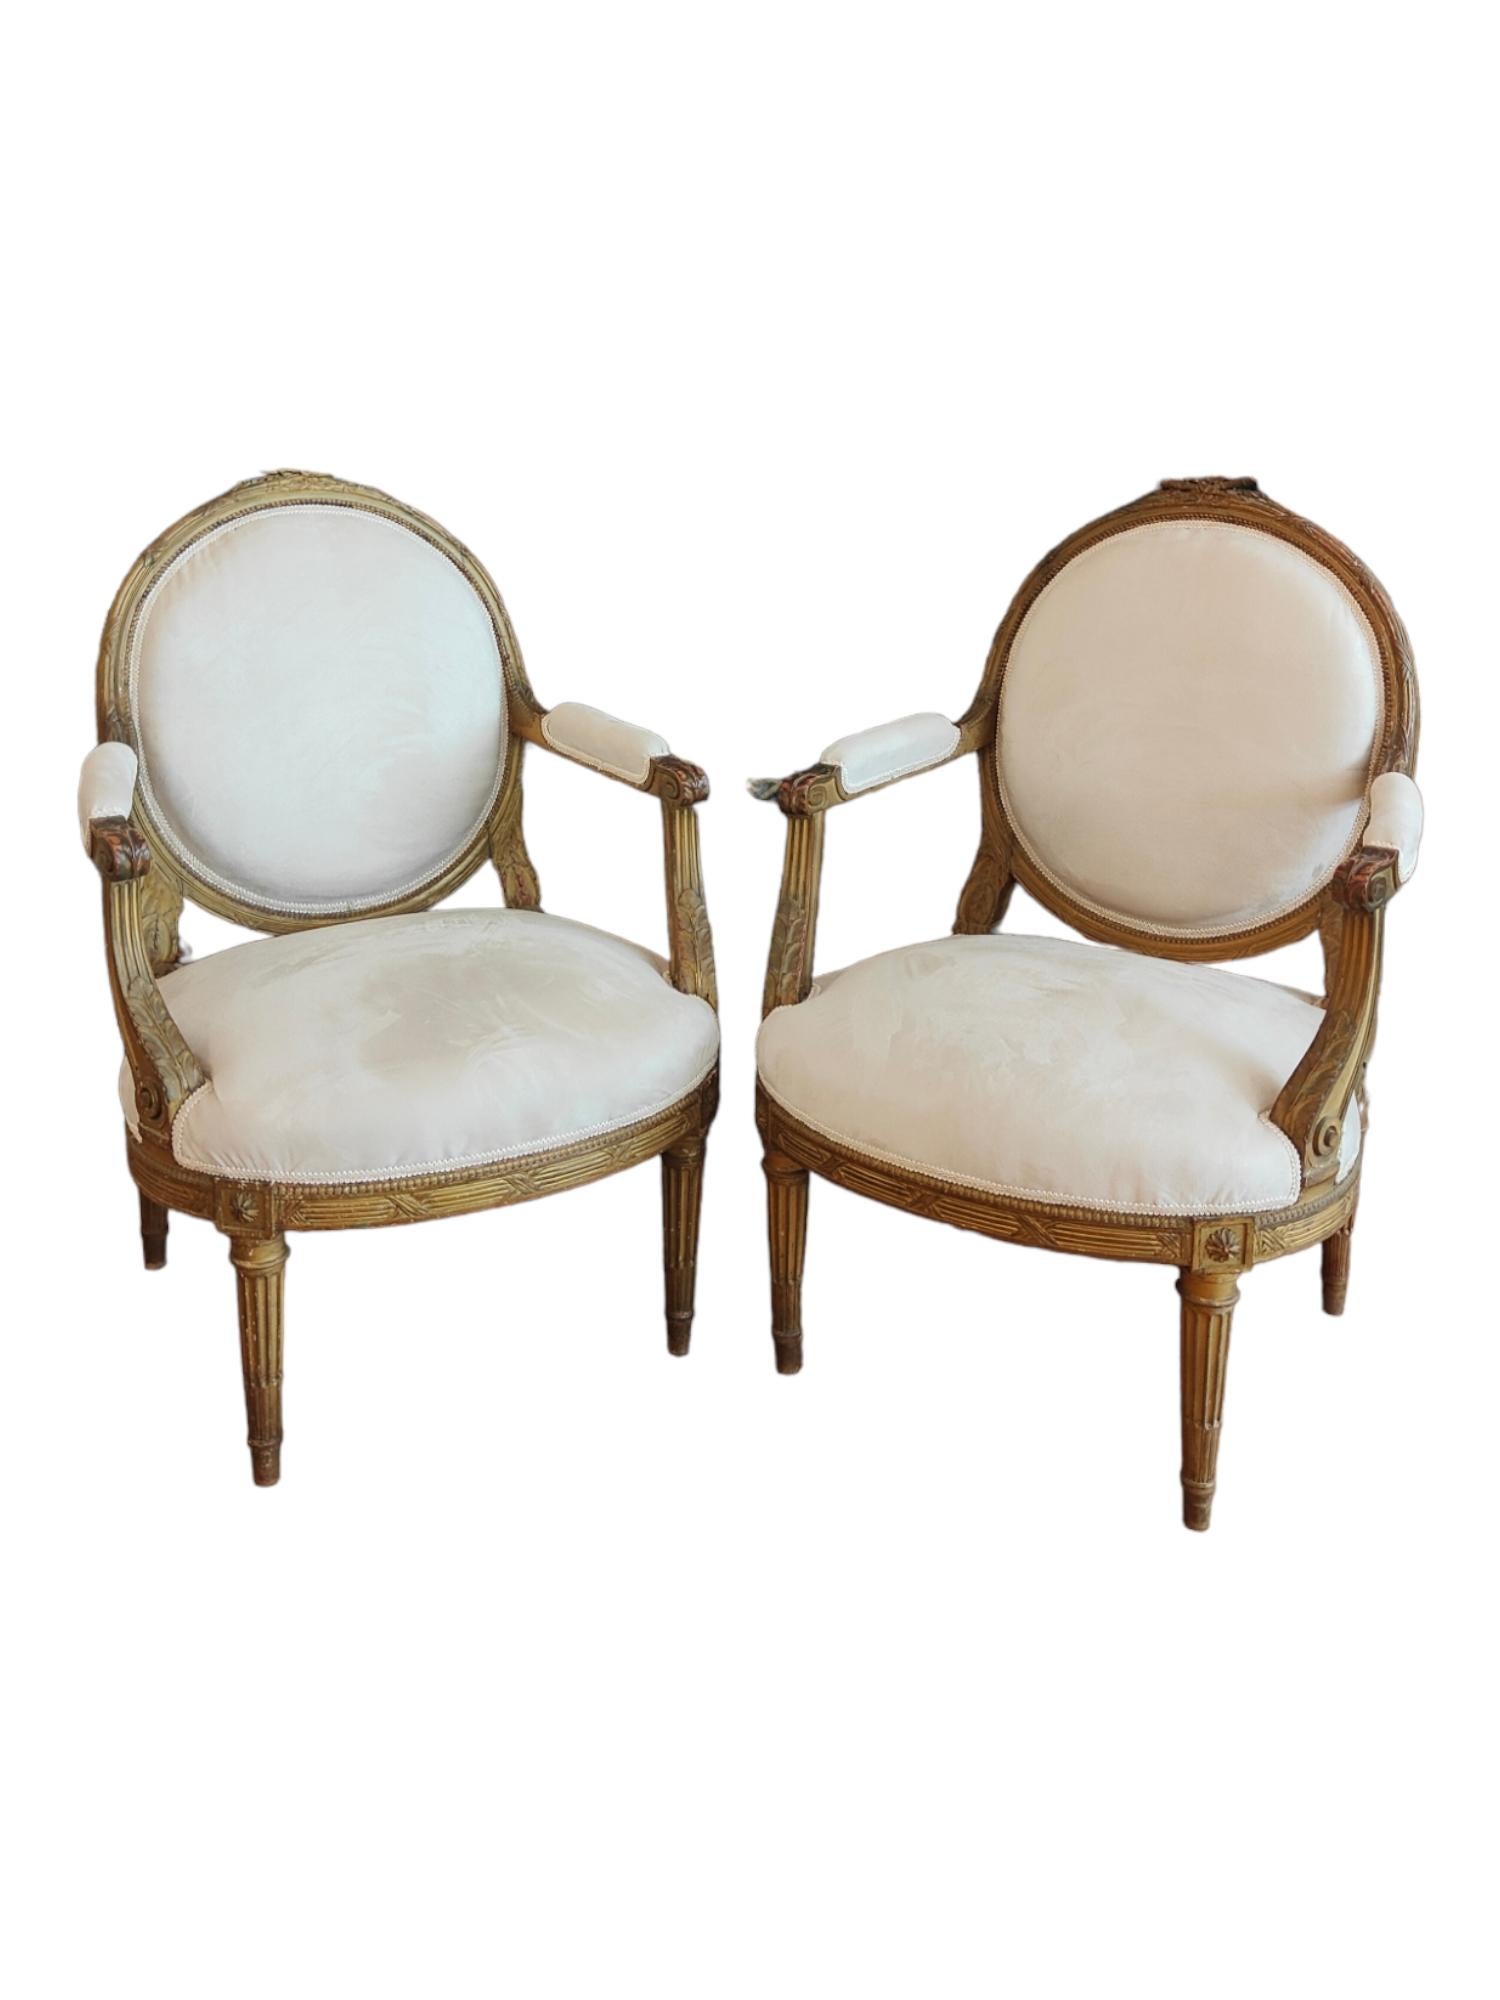 Pair Of French ArmChairs 18th Century In Good Condition For Sale In Madrid, ES